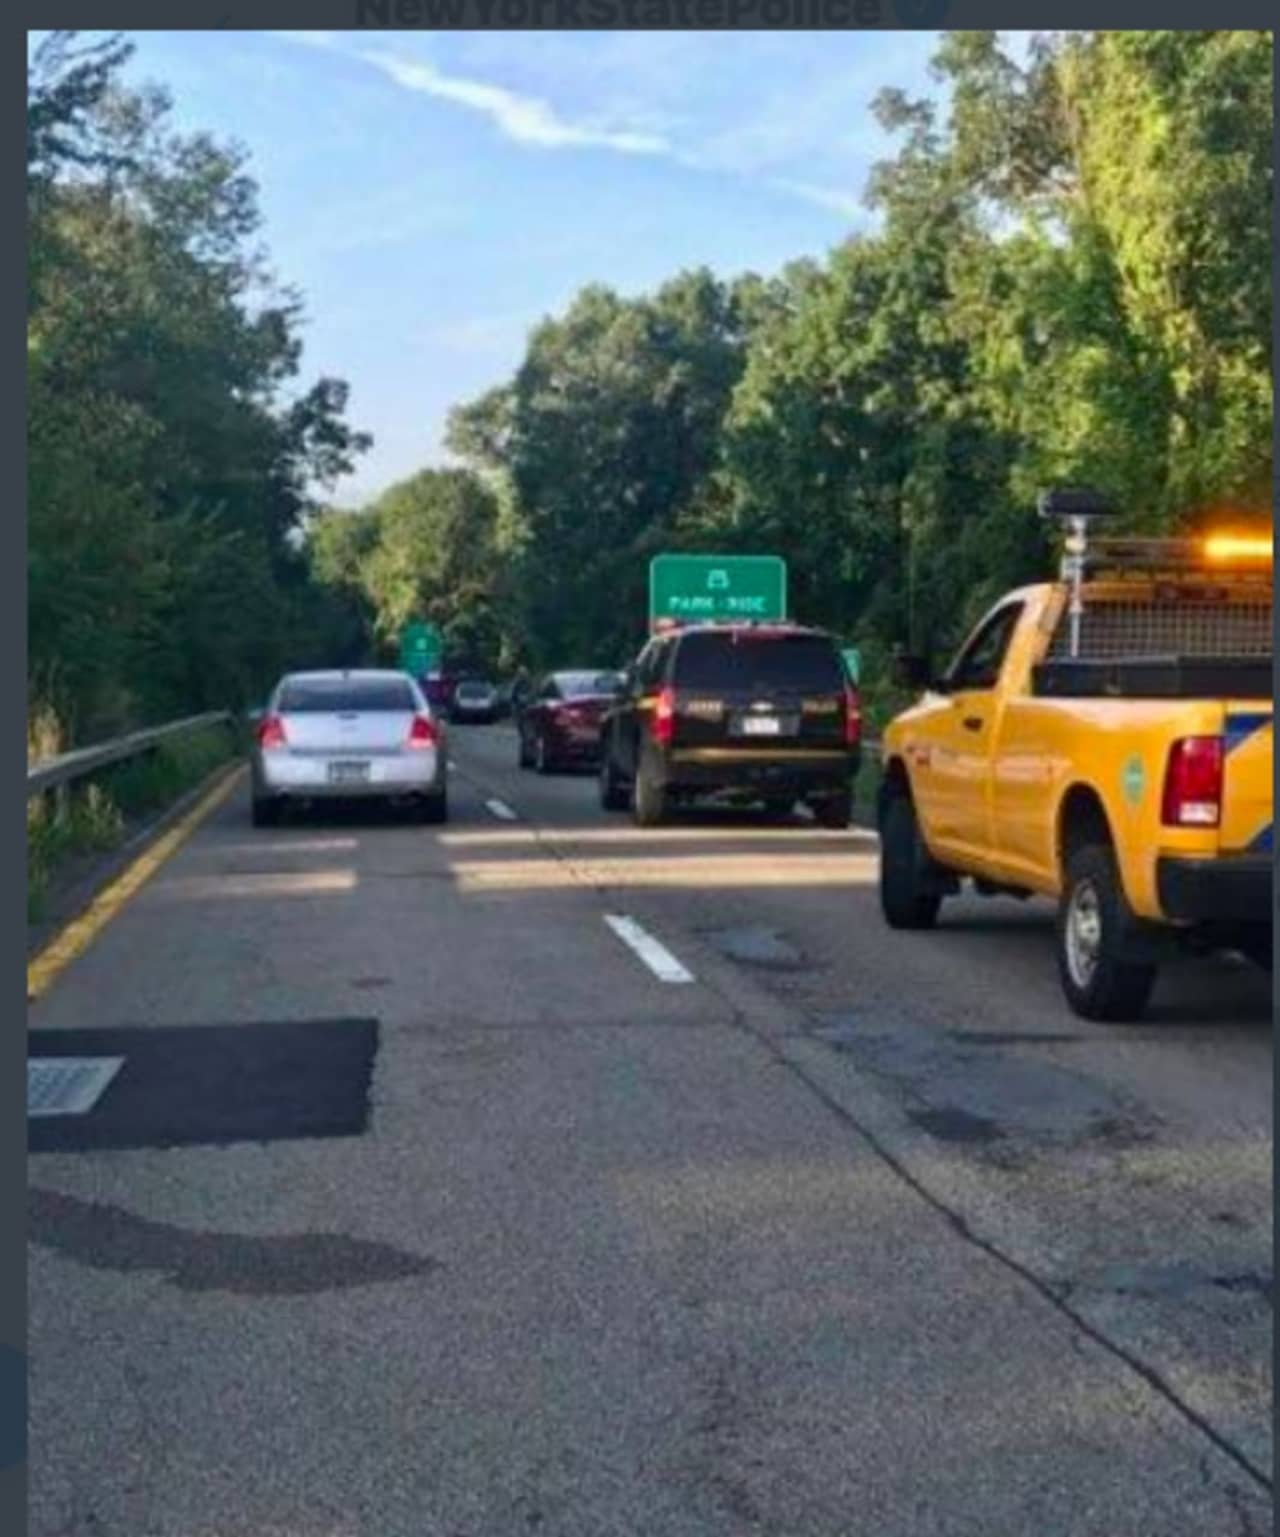 A look at stopped vehicles as traffic was being diverted after the Taconic crash.